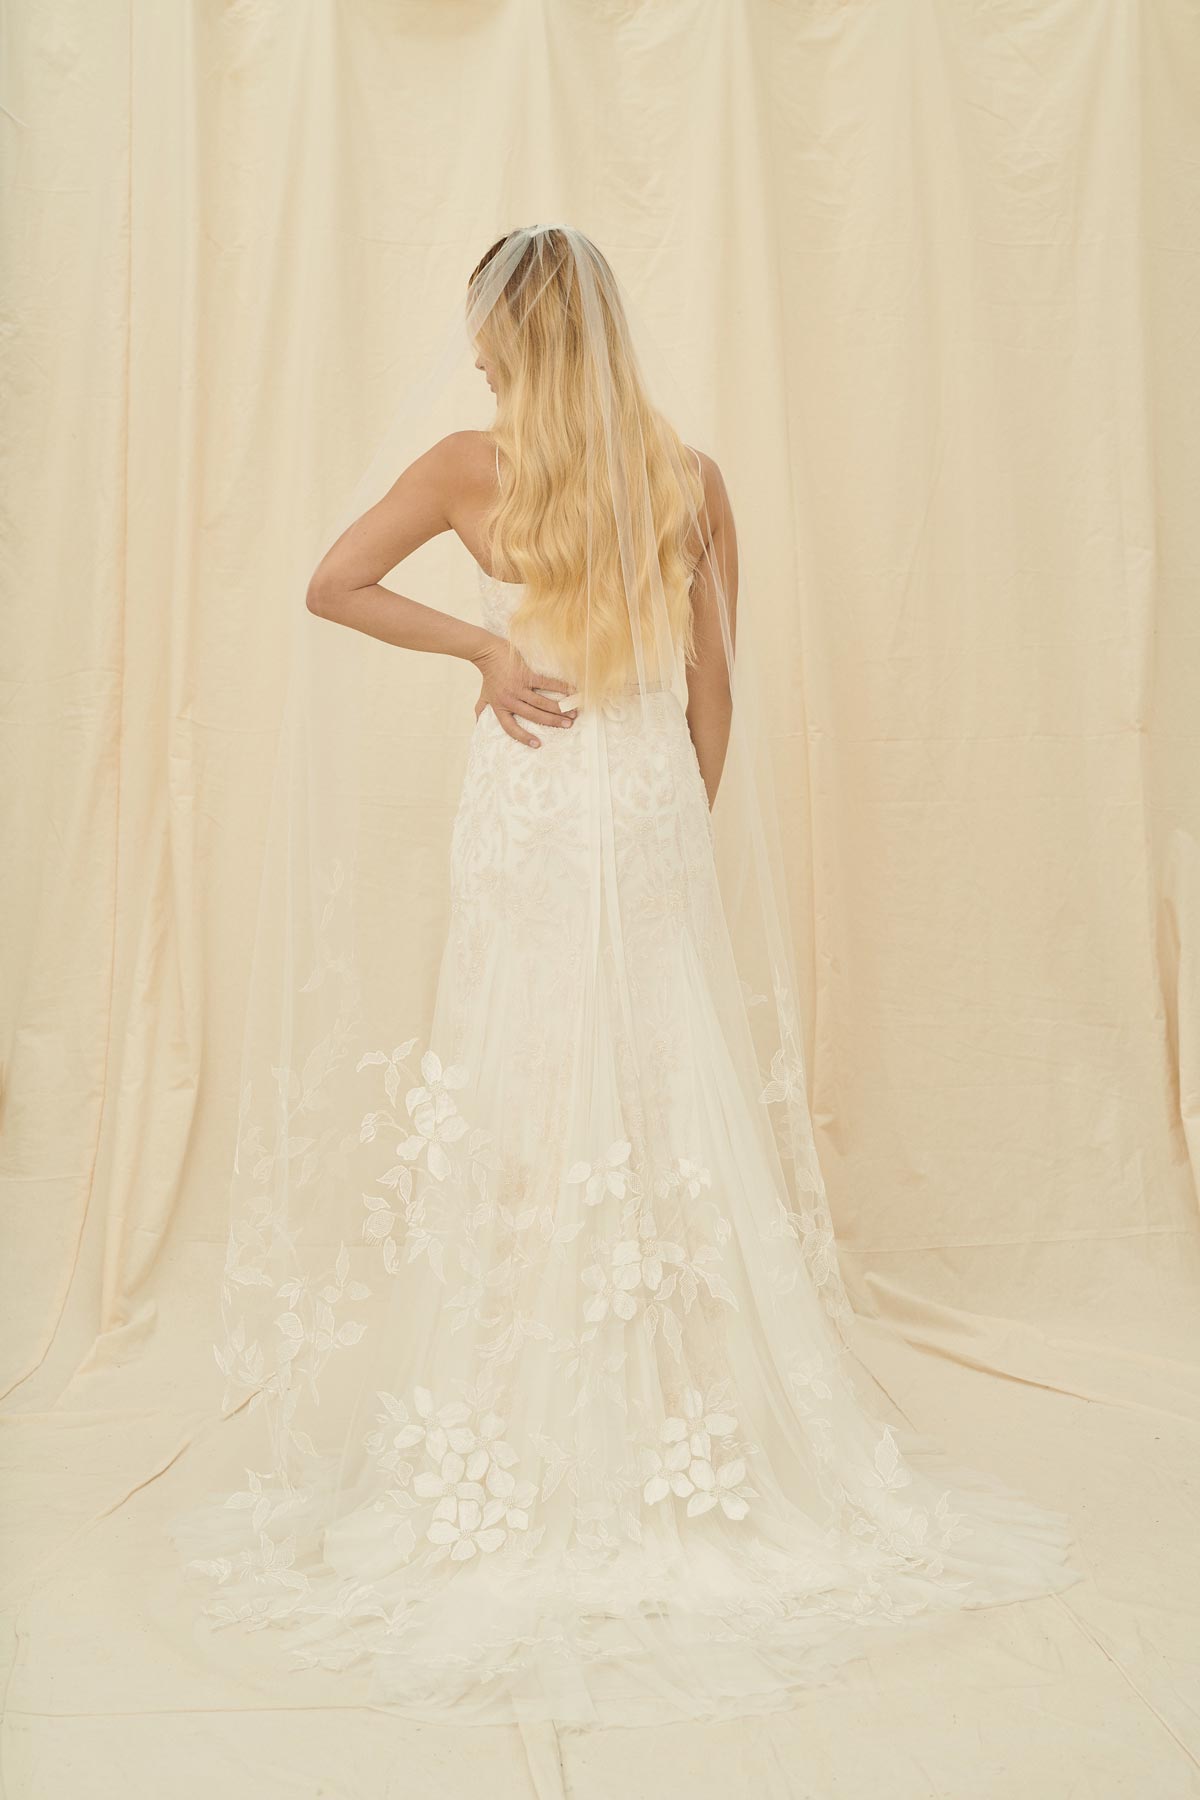 A simple bridal veil with floral embroidery on the bottom half of the soft tulle